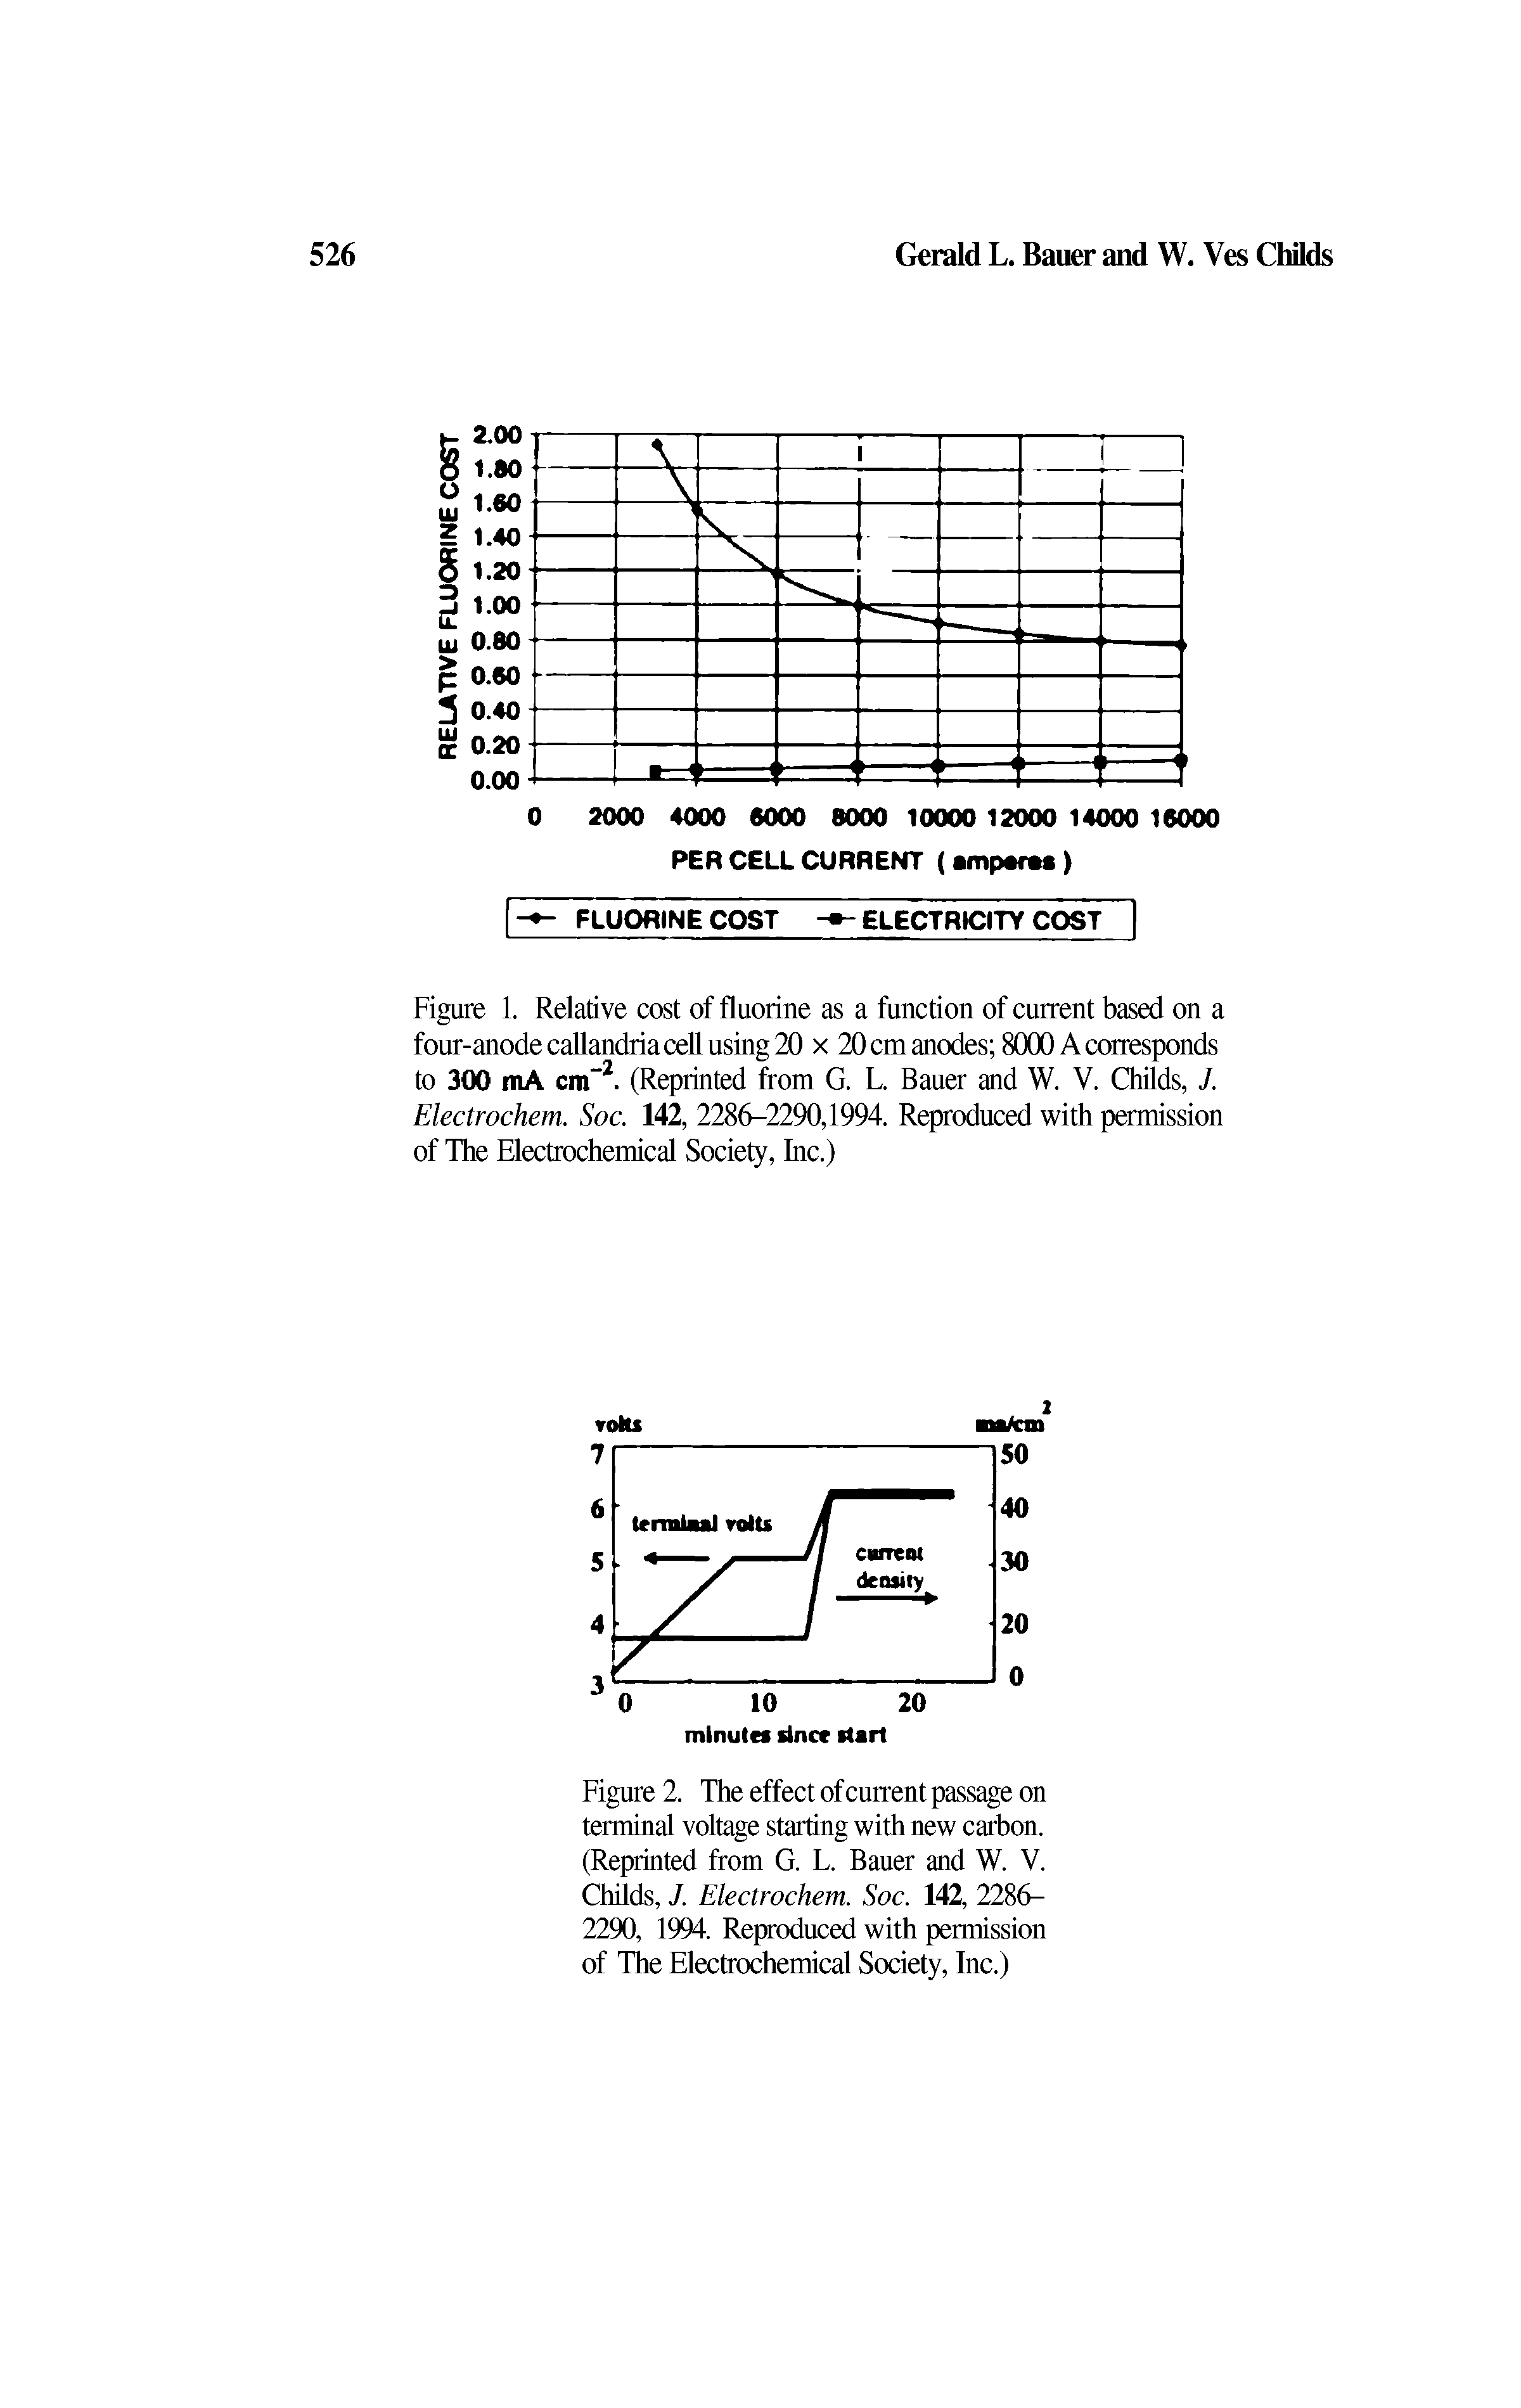 Figure 2. The effect of current passage on terminal voltage starting with new carbon. (Reprinted from G. L. Bauer and W. V. Childs, J. Electrochem. Soc. 142, 2286-2290, 1994. Reproduced with permission of The Electrochemical Society, Inc.)...